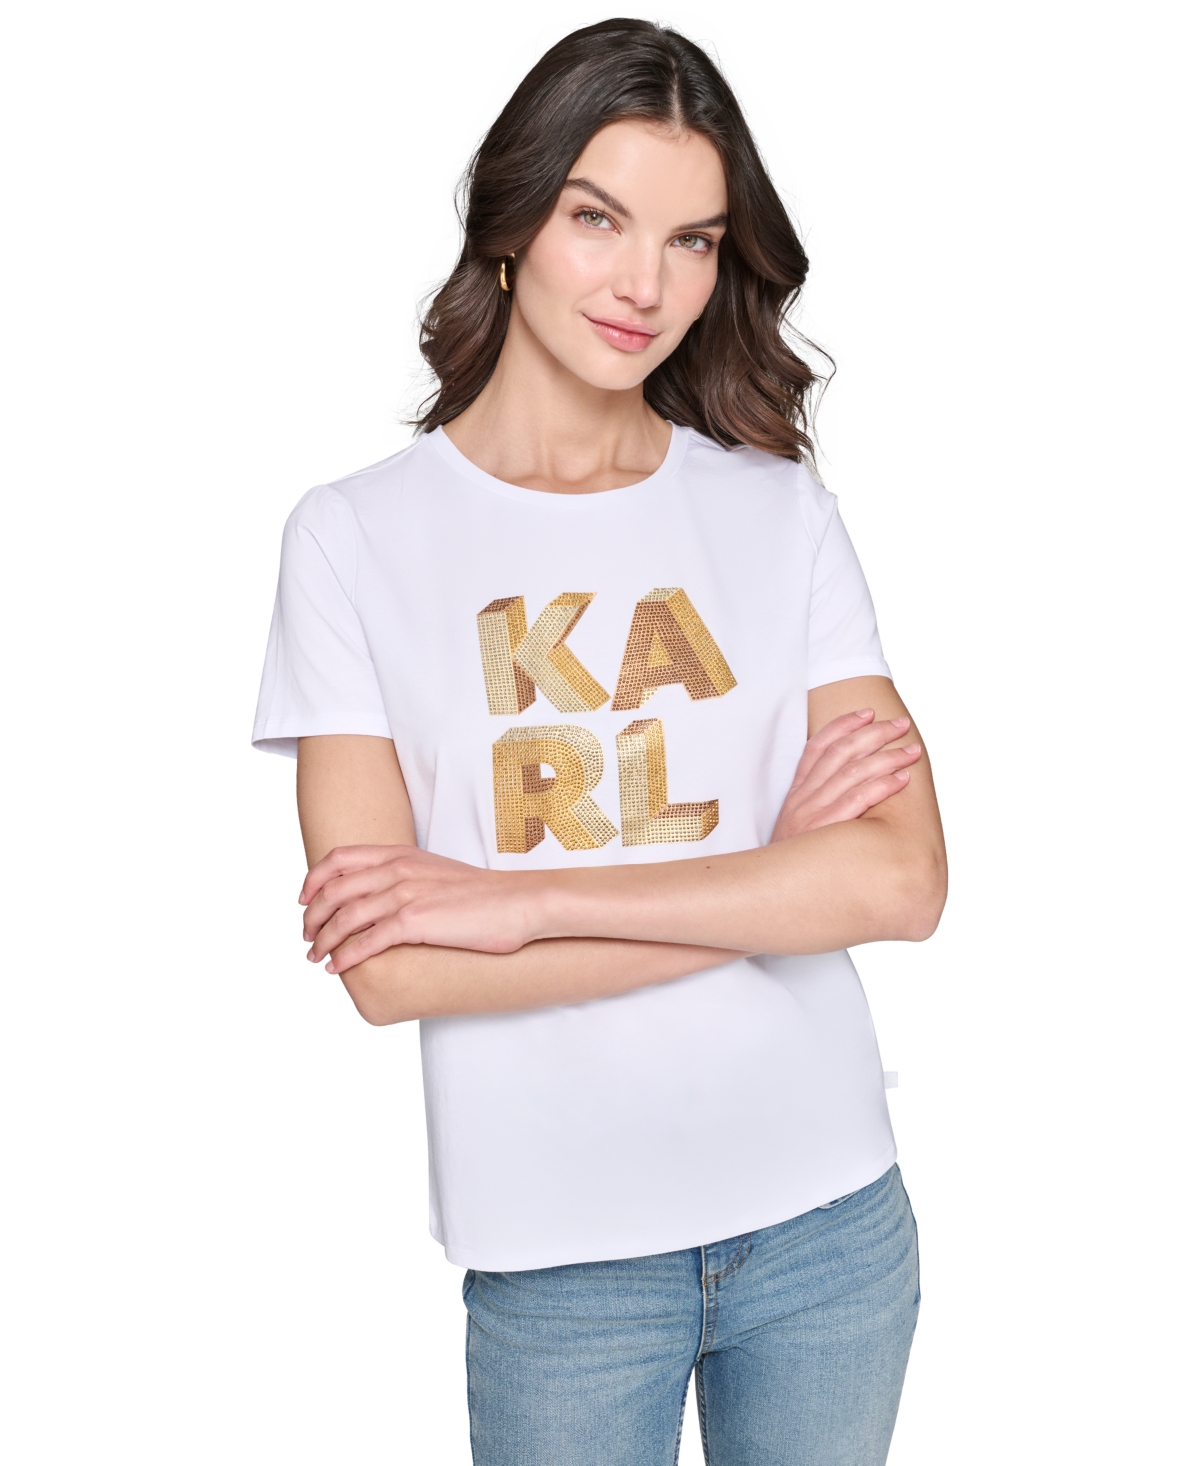 Women's Embellished Graphic T-Shirt - White